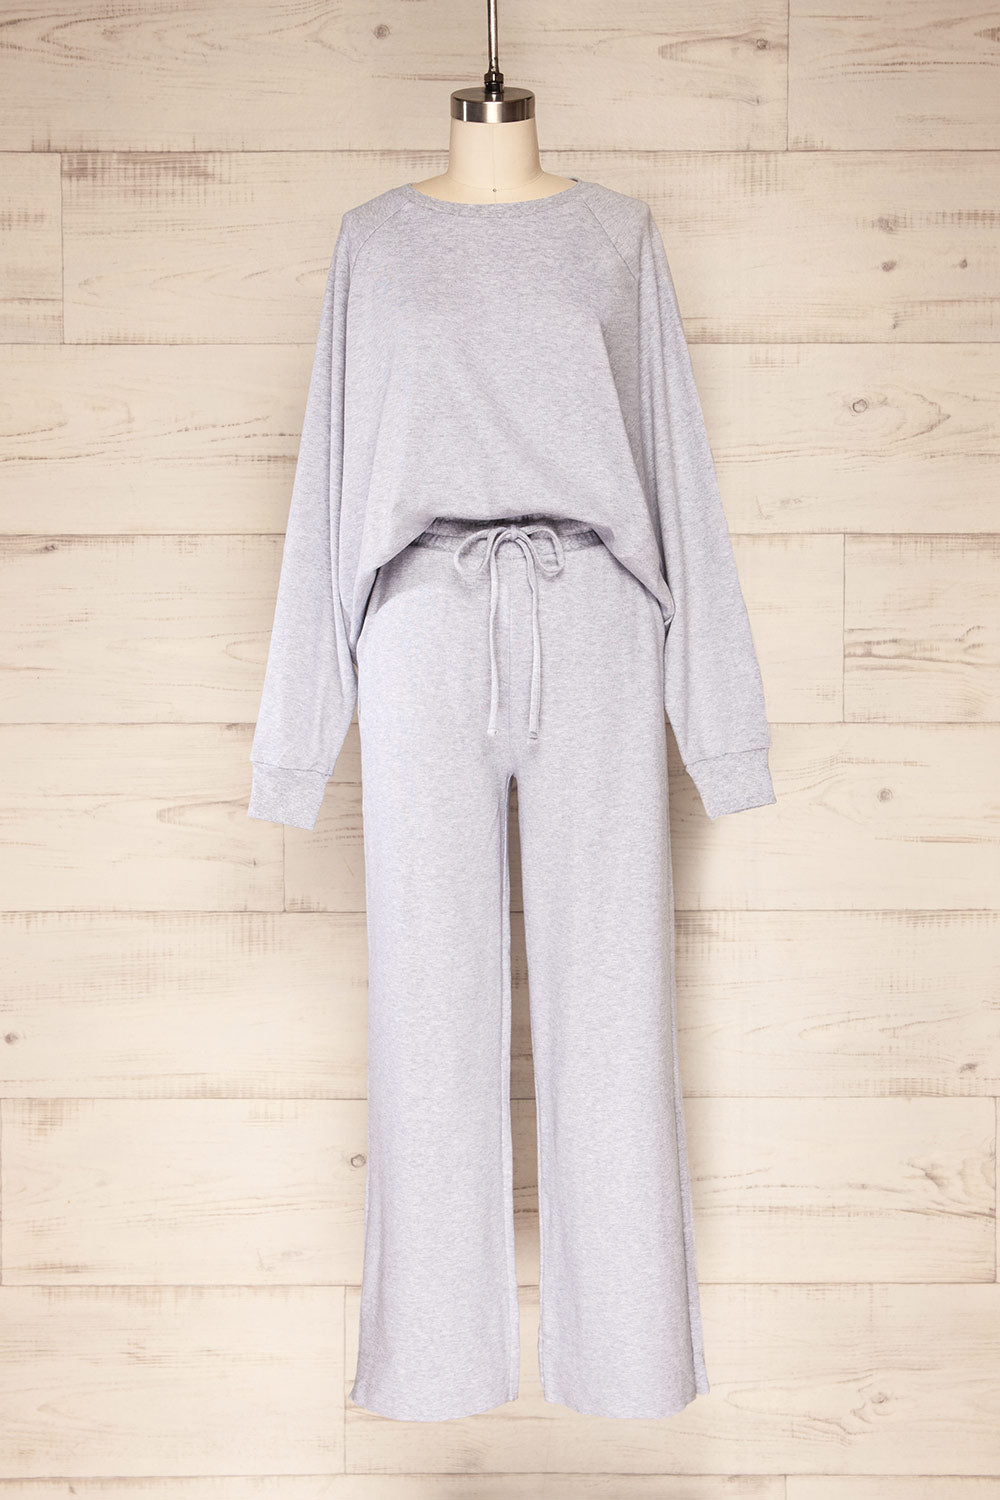 Set Brie Grey Sweater and Lounge Pants